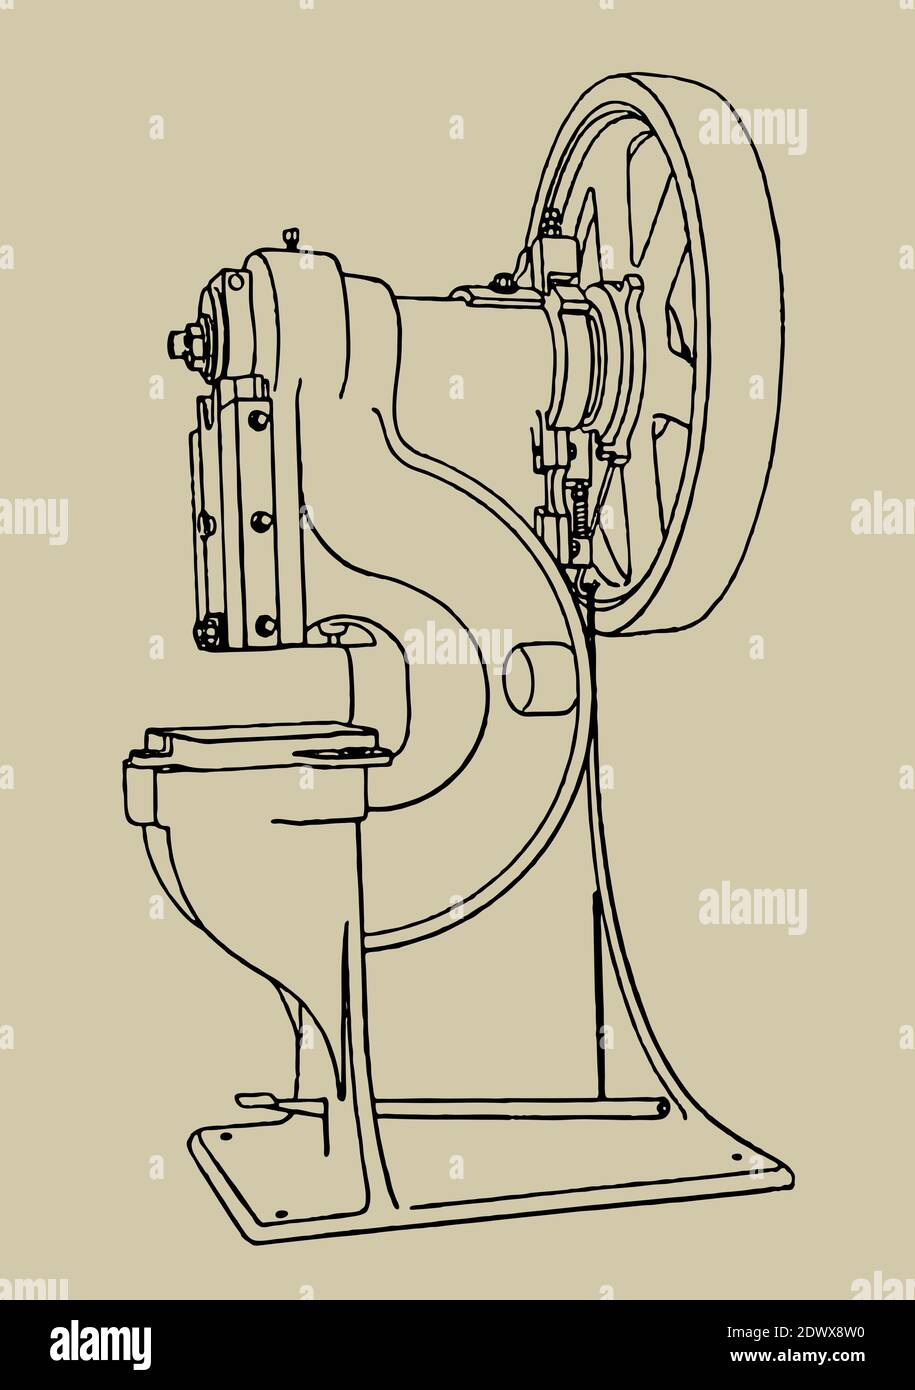 Powerful cutting and punching press in three-quarter view isolated on a beige background, after a drawing from the 19th century Stock Vector